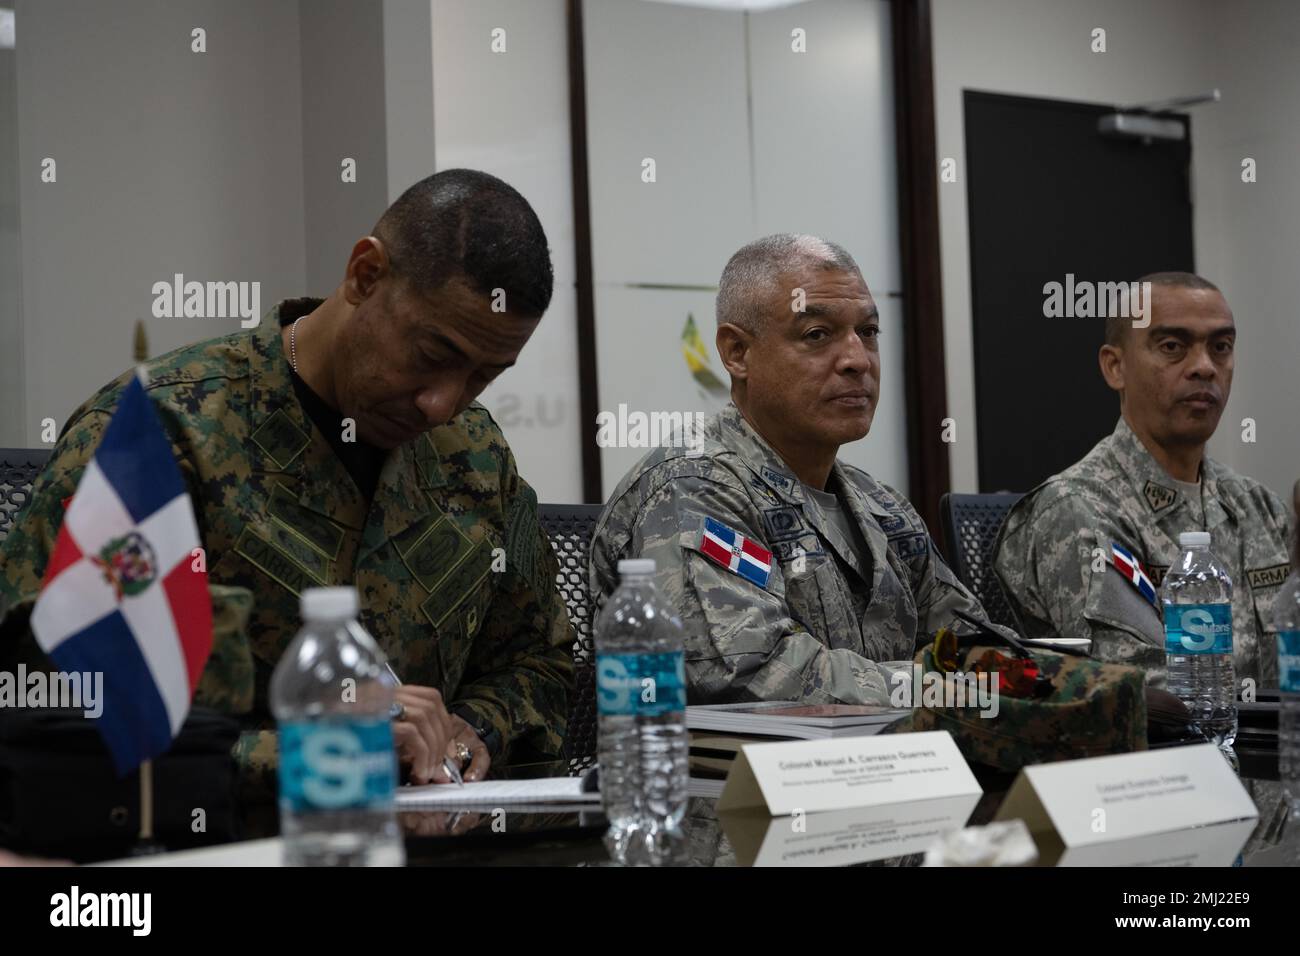 From left, Dominican Republic army Col. Manuel Carrasco, director of DIGECEM, Dominican Republic air force Col. Julio Garcia, director of ESFODECAM and Dominican Republic navy Capt. Eddy Martinez, navy school director, attend a State Partnership Program meeting with leadership of the Puerto Rico Air National Guard at Muñiz Air National Guard Base, Carolina, Puerto Rico, Aug. 24, 2022. The SPP meeting served to strengthen relationships between the 156th Wing and the Dominican Republic armed forces. Stock Photo